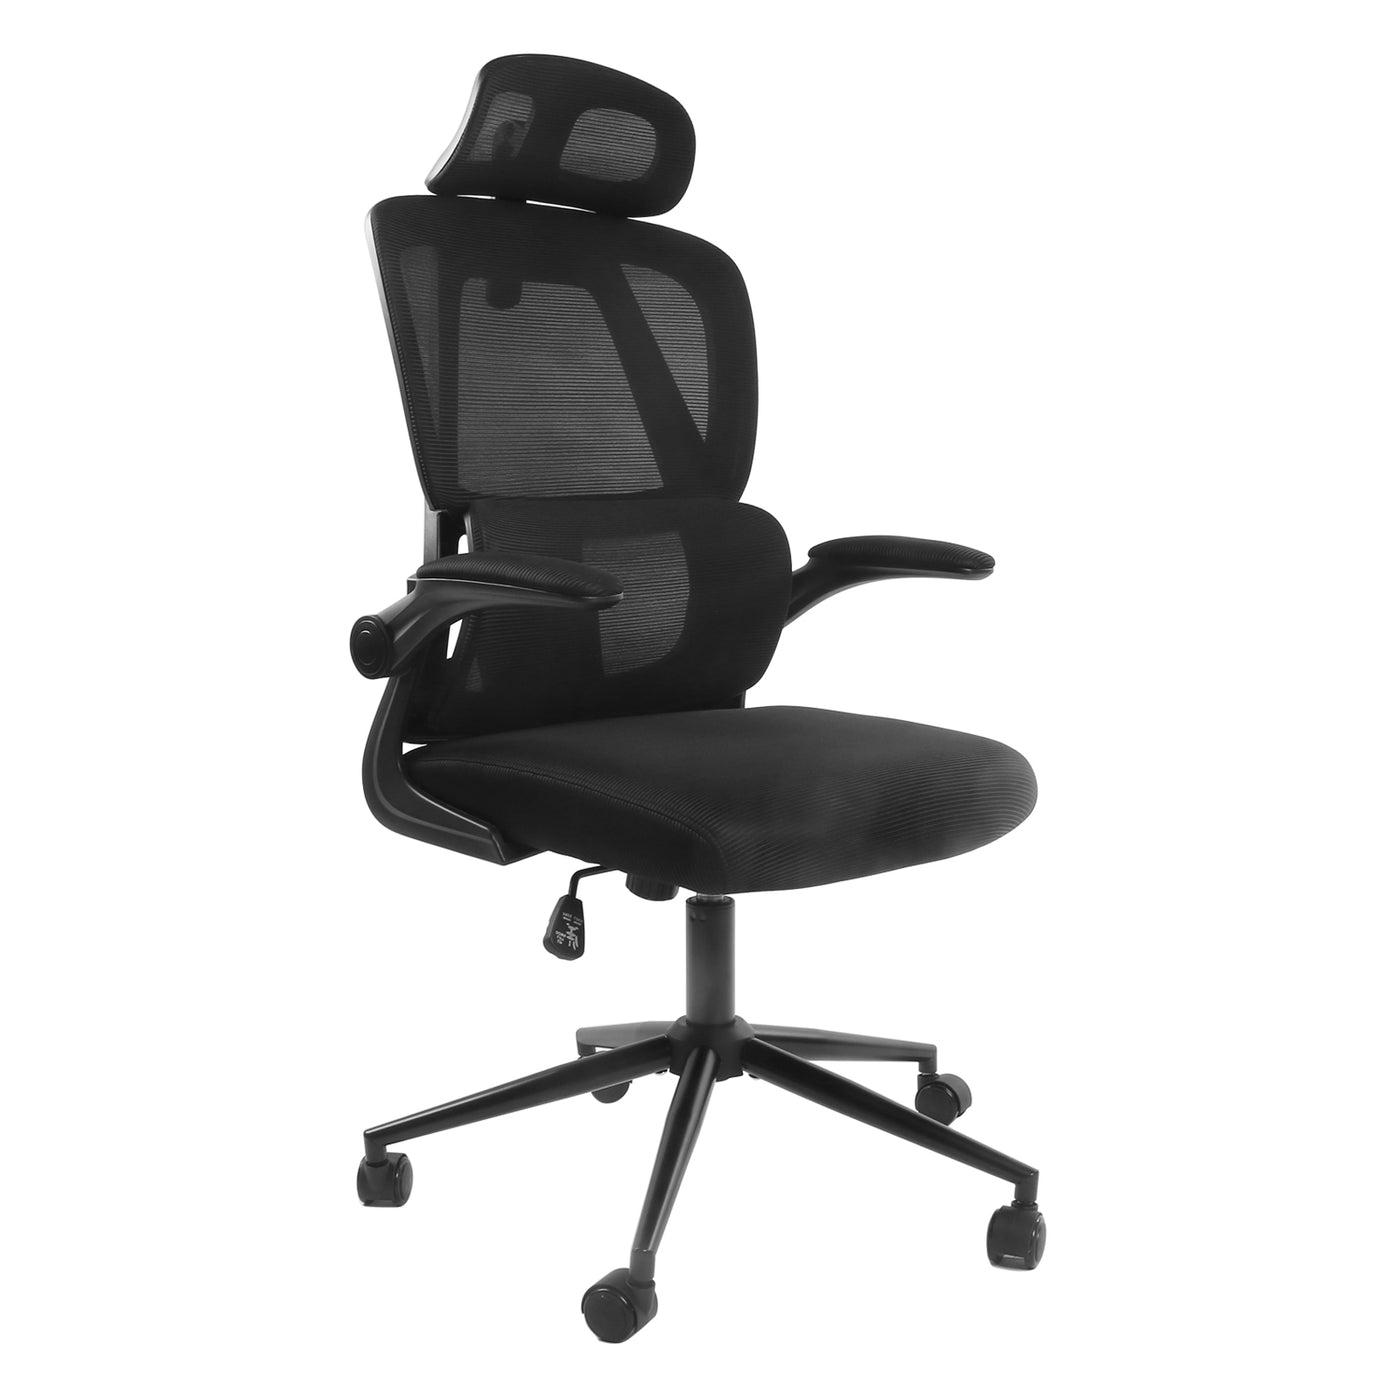 Ergonomic Office Chair Height Adjustable Seat Swivel Computer Chair Breathable Mesh Chair with Flip-up Armrest, Lumbar Support, Adjustable Headrest